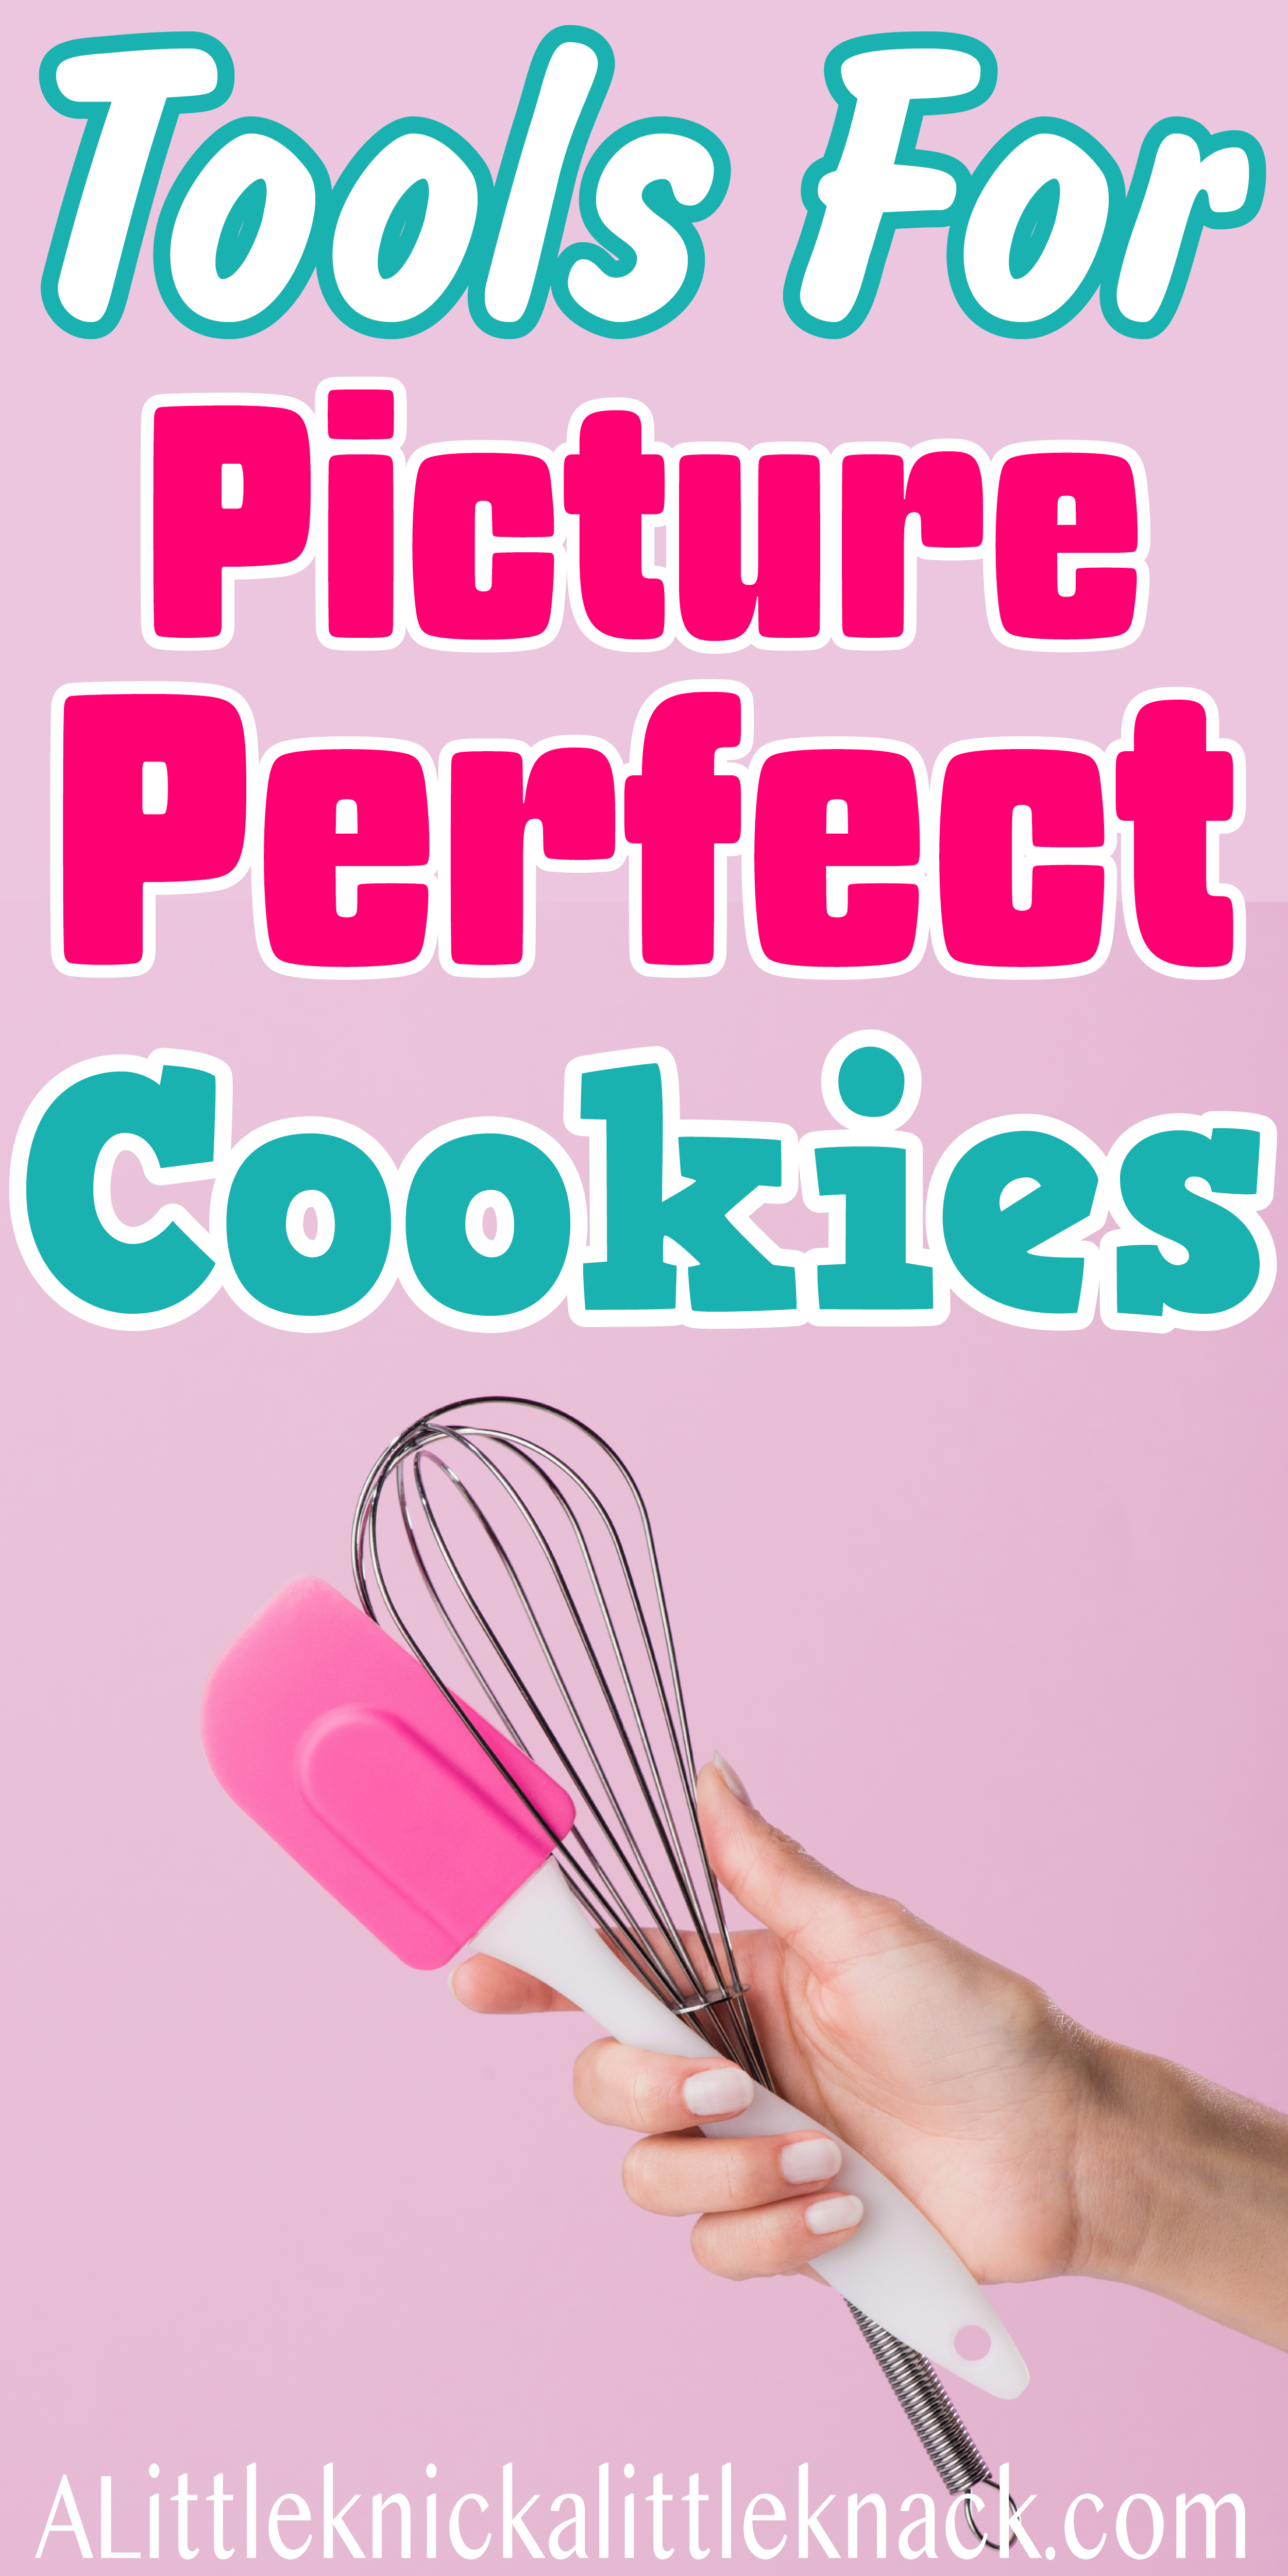 Baking tools being held in front of a pink background with a text overlay 